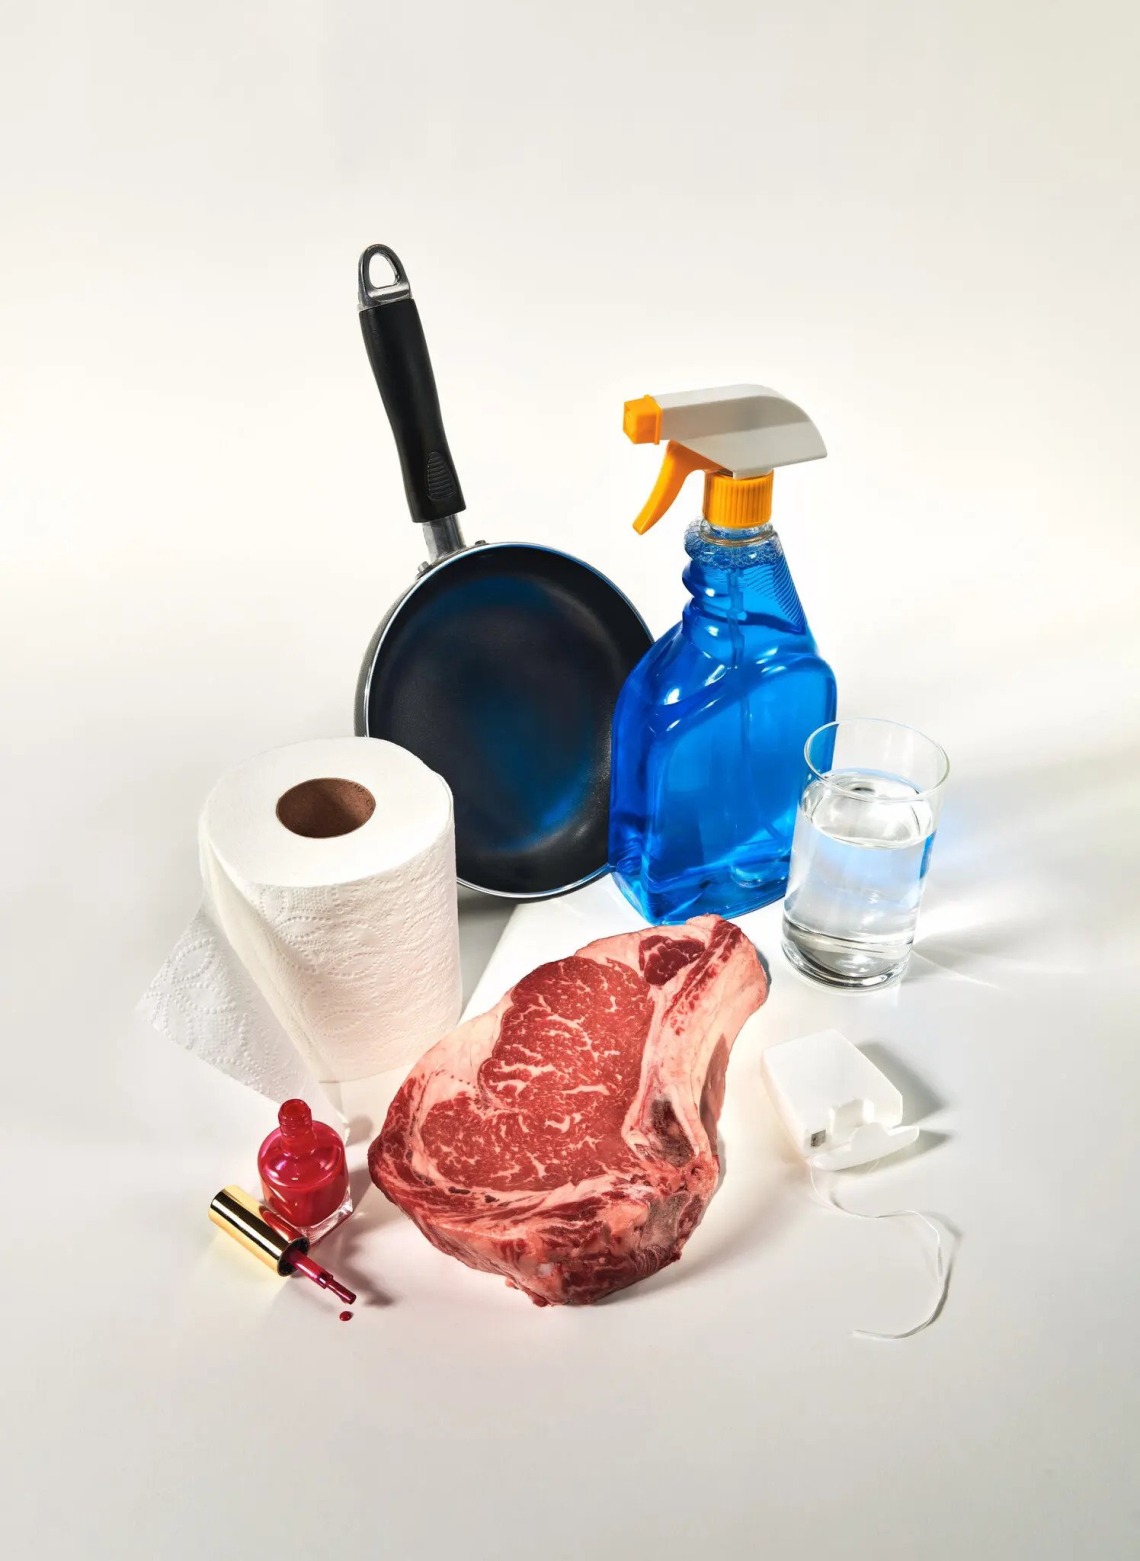 An image of a steak surrounded by various chemicals